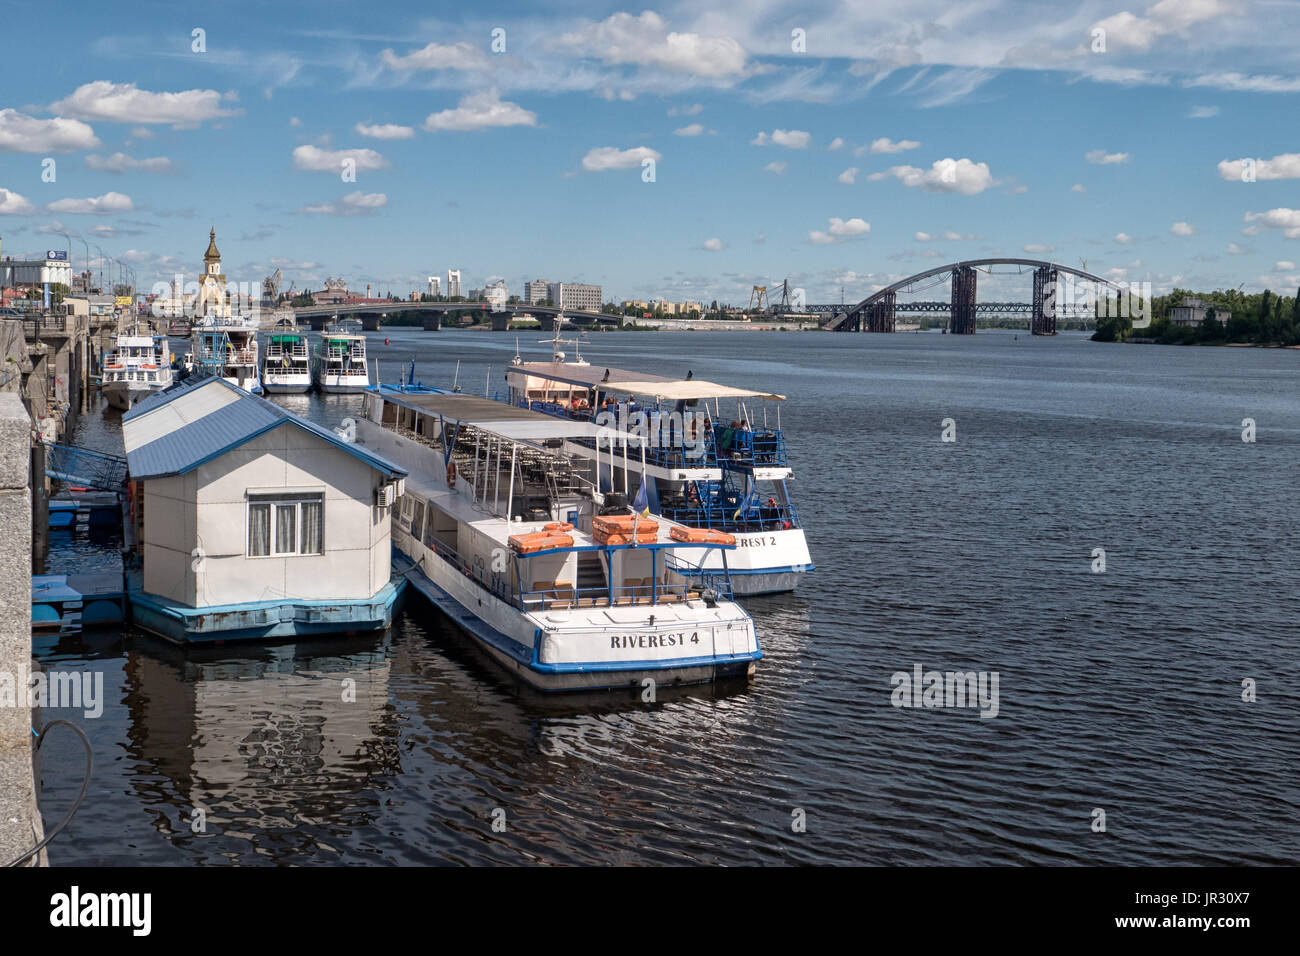 KYIV, UKRAINE - JUNE 12, 2016:  Tourist Boats at the Kiev River Port on the Dnieper (Dnipro) River in the Podil District Stock Photo